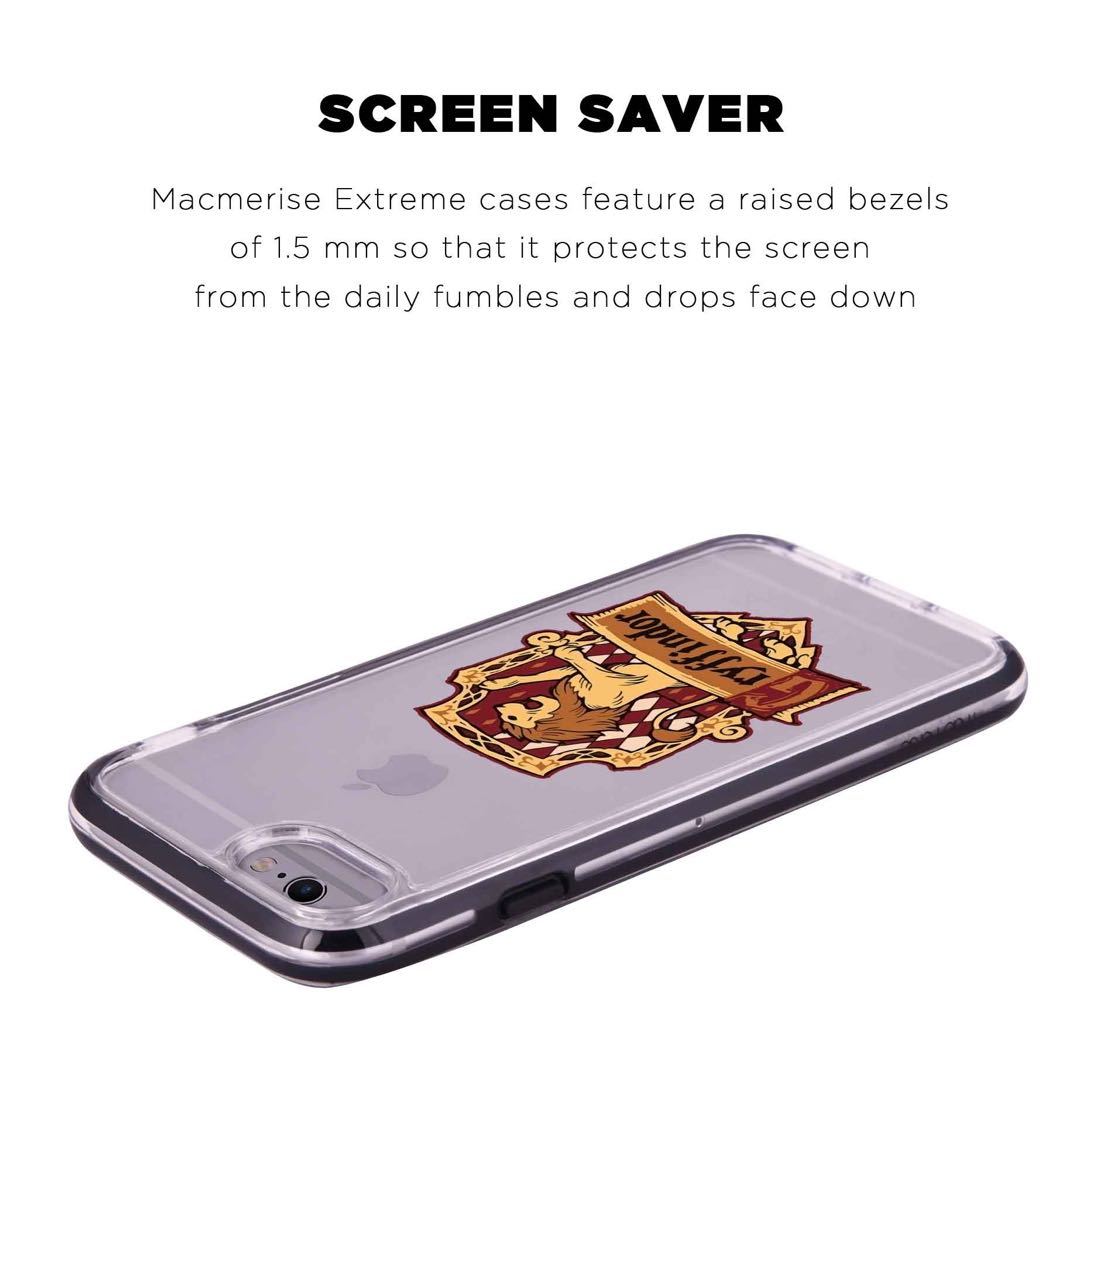 Crest Gryffindor - Extreme Phone Case for iPhone 6 Plus